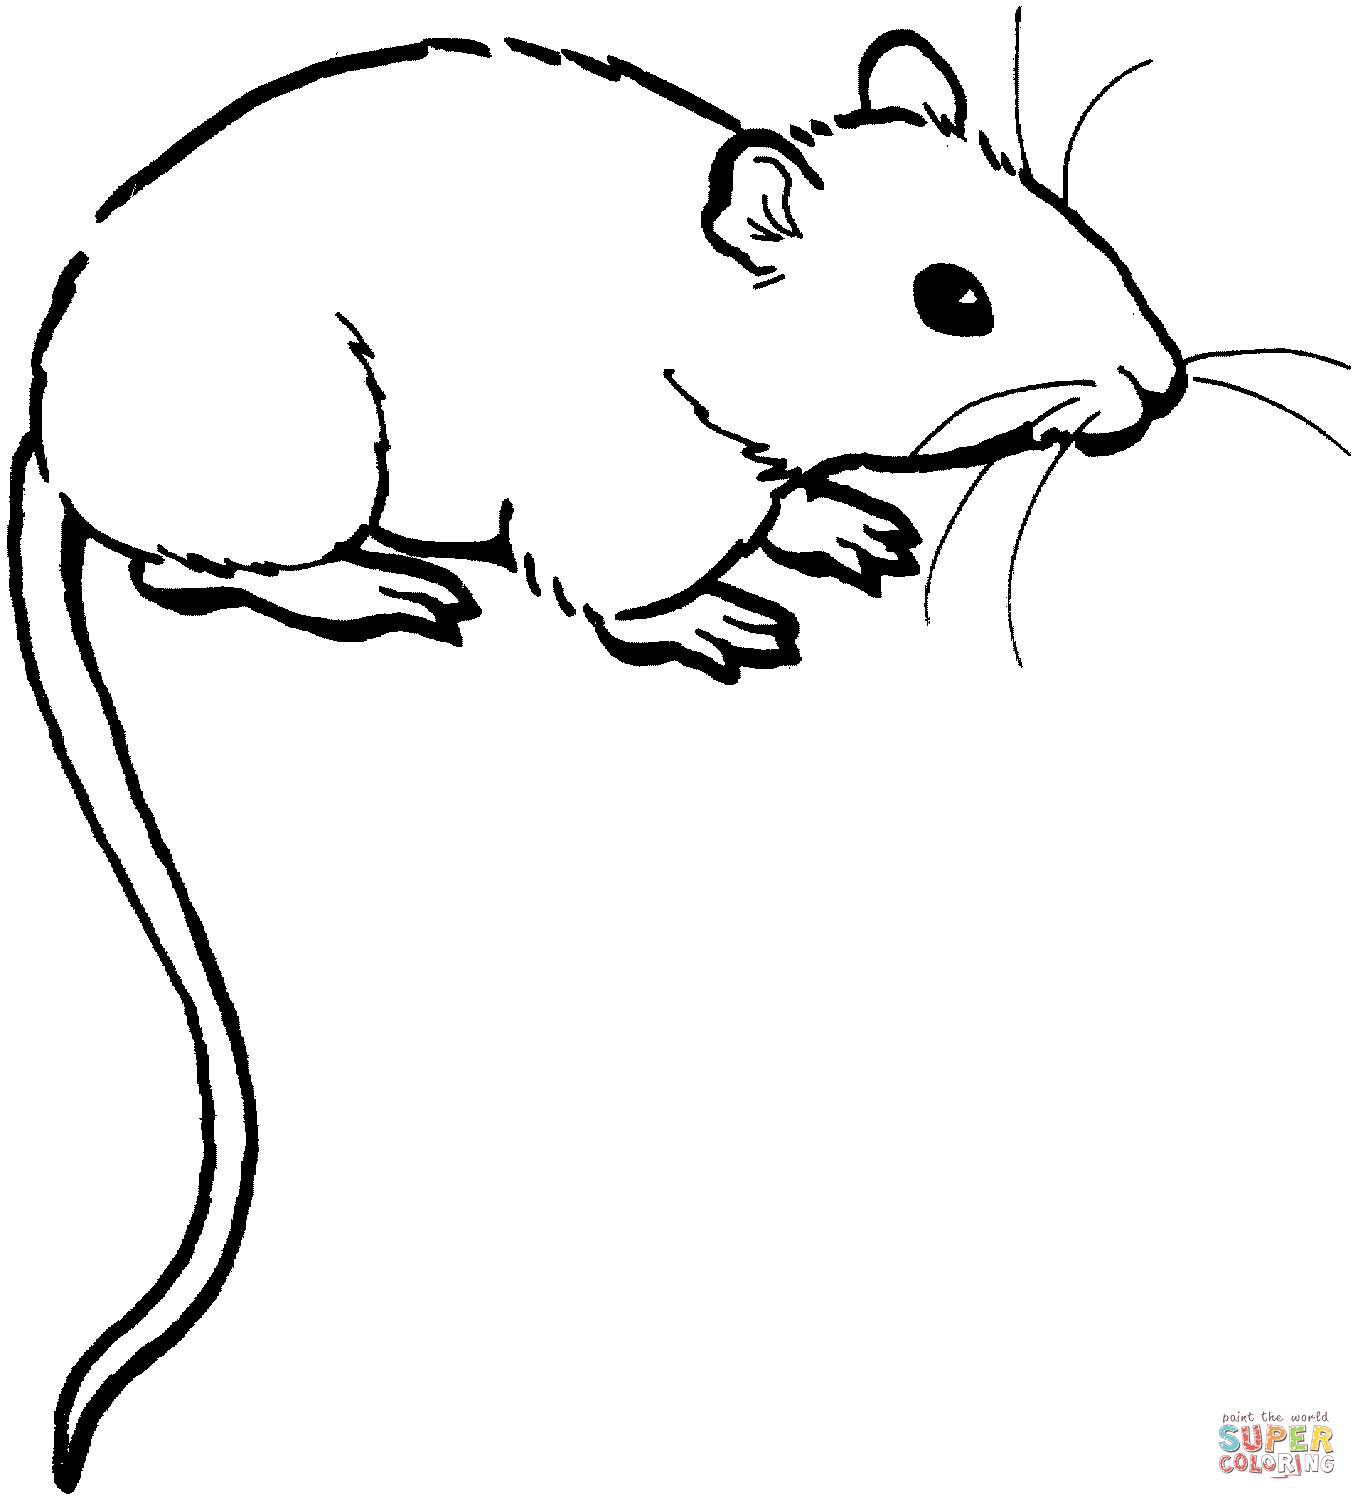 Rodent Coloring Pages 03 Gif 1357 1500 Lion Coloring Pages Cool Coloring Pages Mickey Mouse Coloring Pages